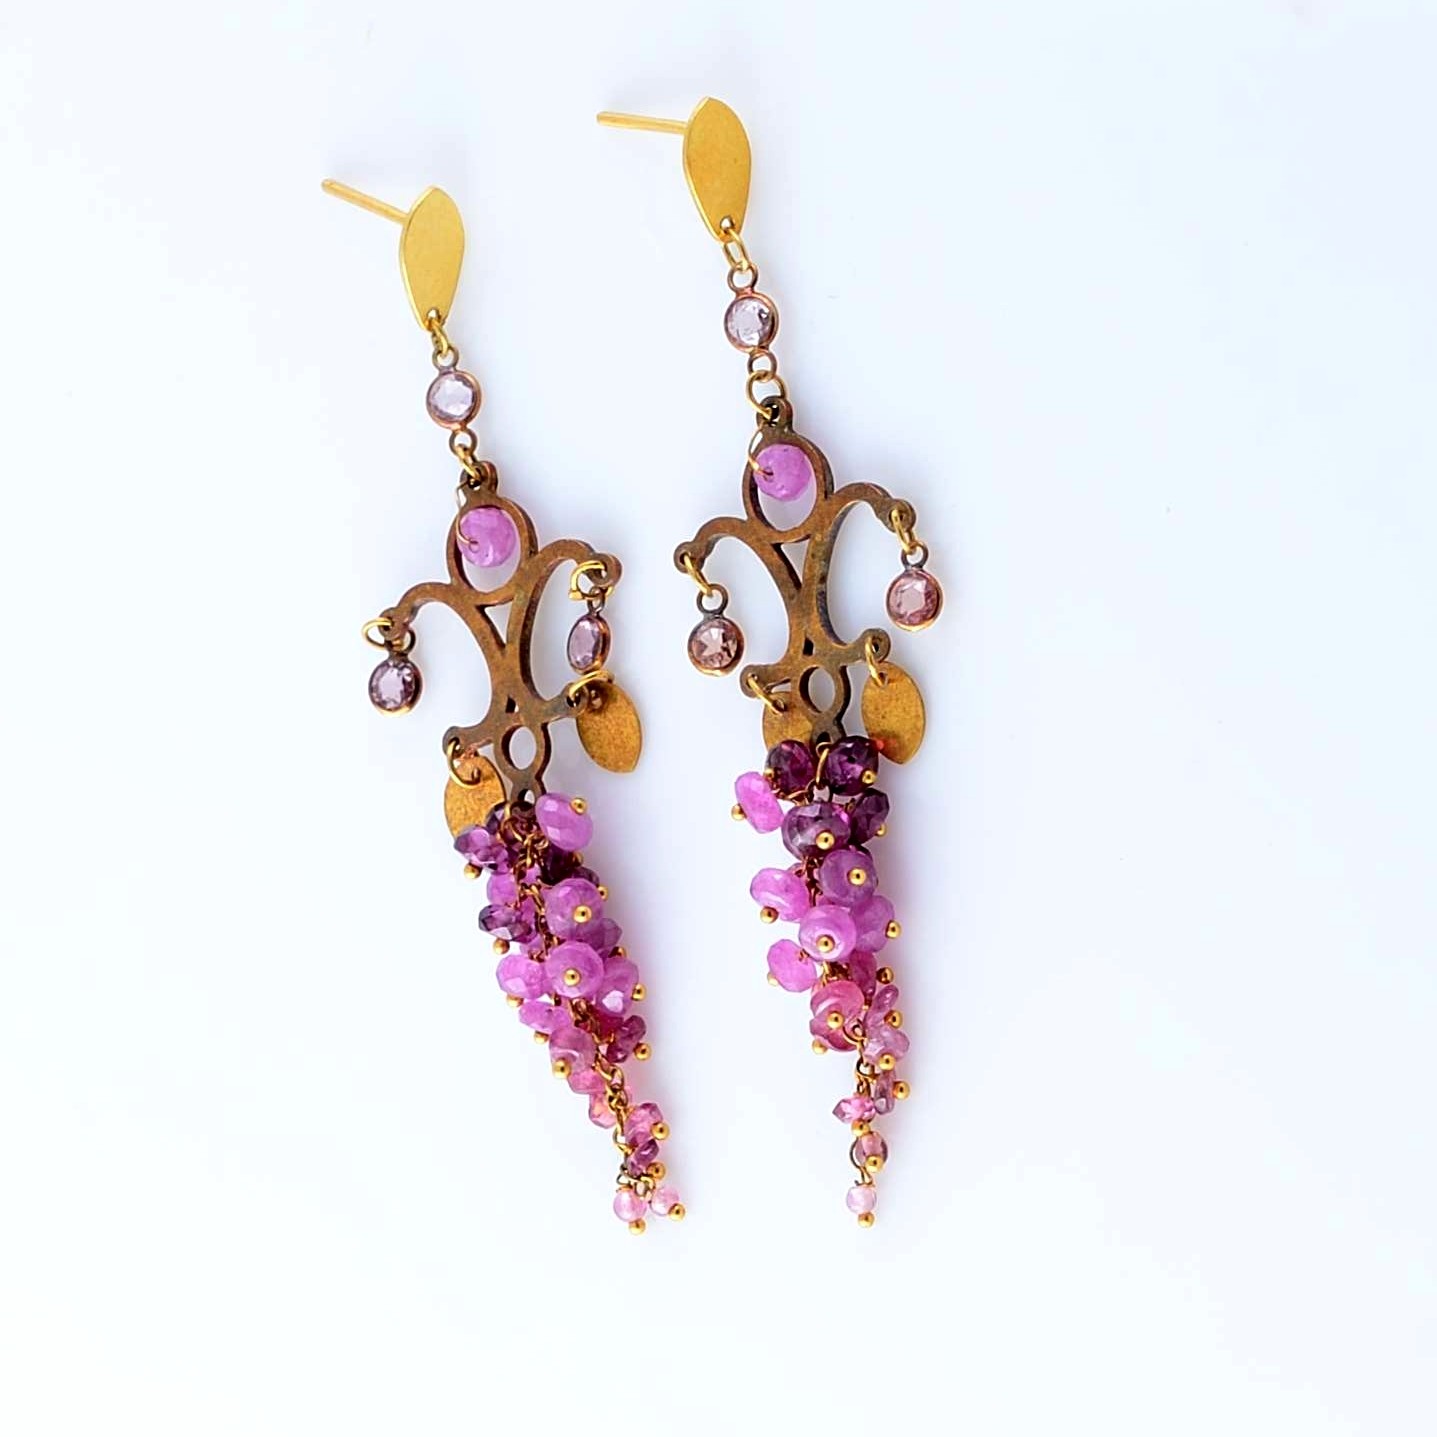 Gold earrings with pink sapphires